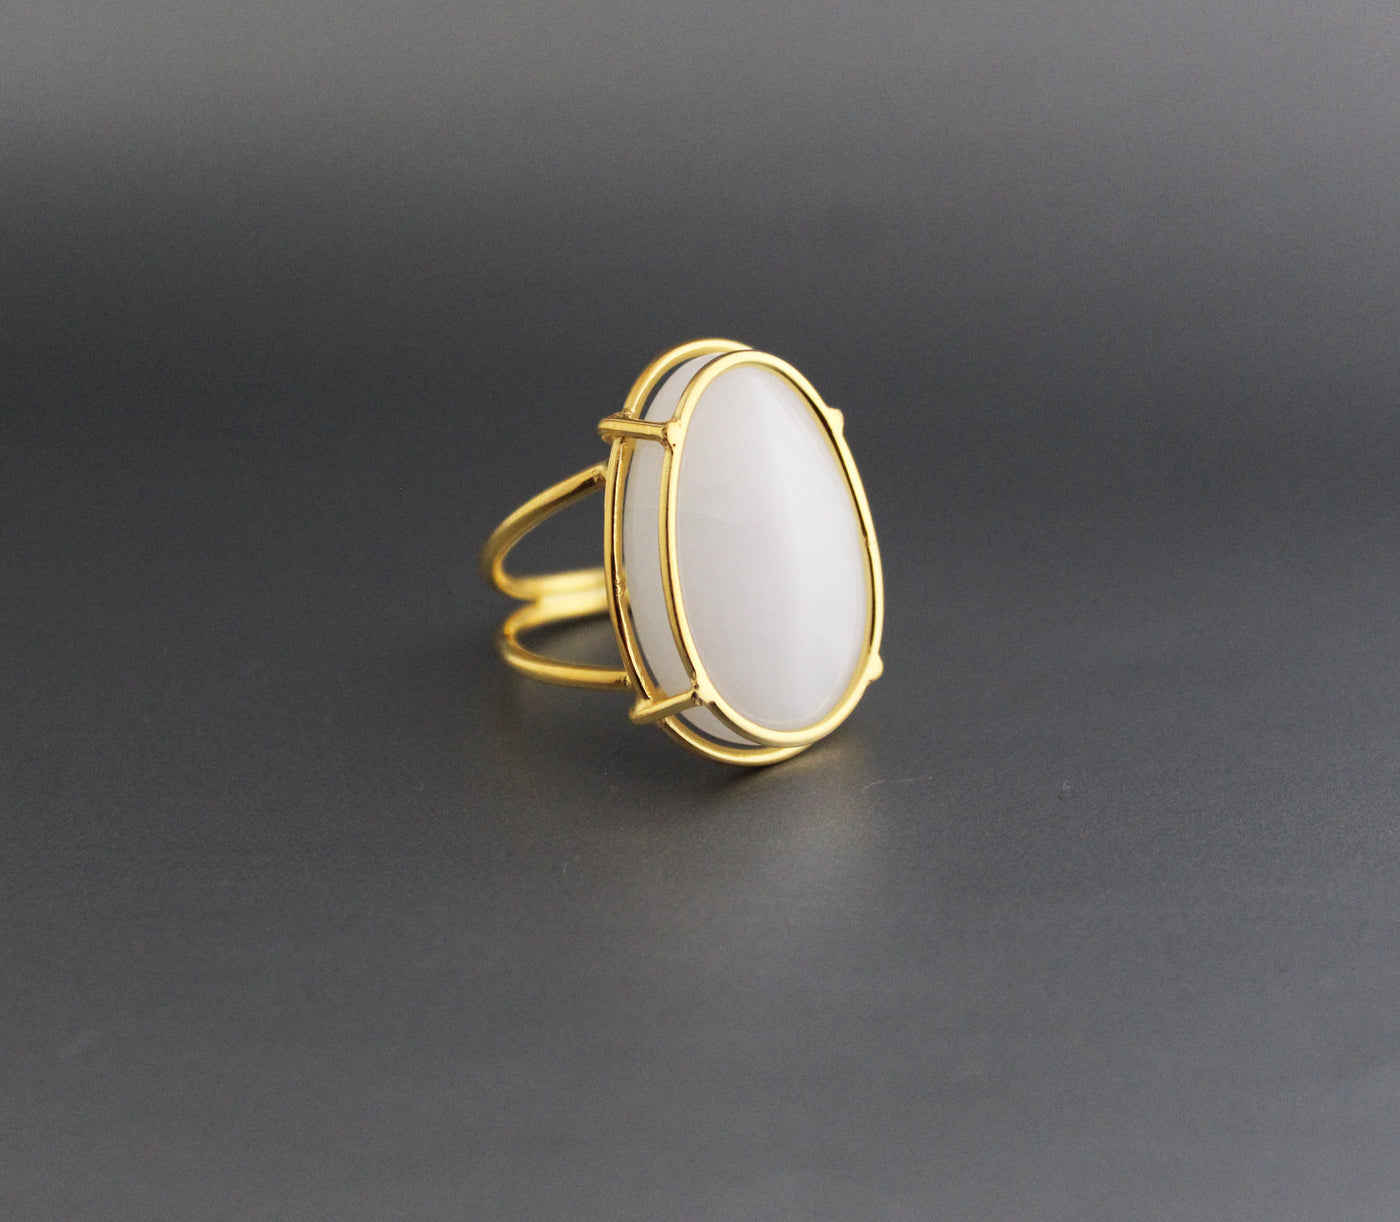 White Agate Ring, White Stone Ring, 18 K Gold Ring, Gemstone Ring, Stackable Solitaire Ring, Sterling Silver 925, Statement, Organic , Boho